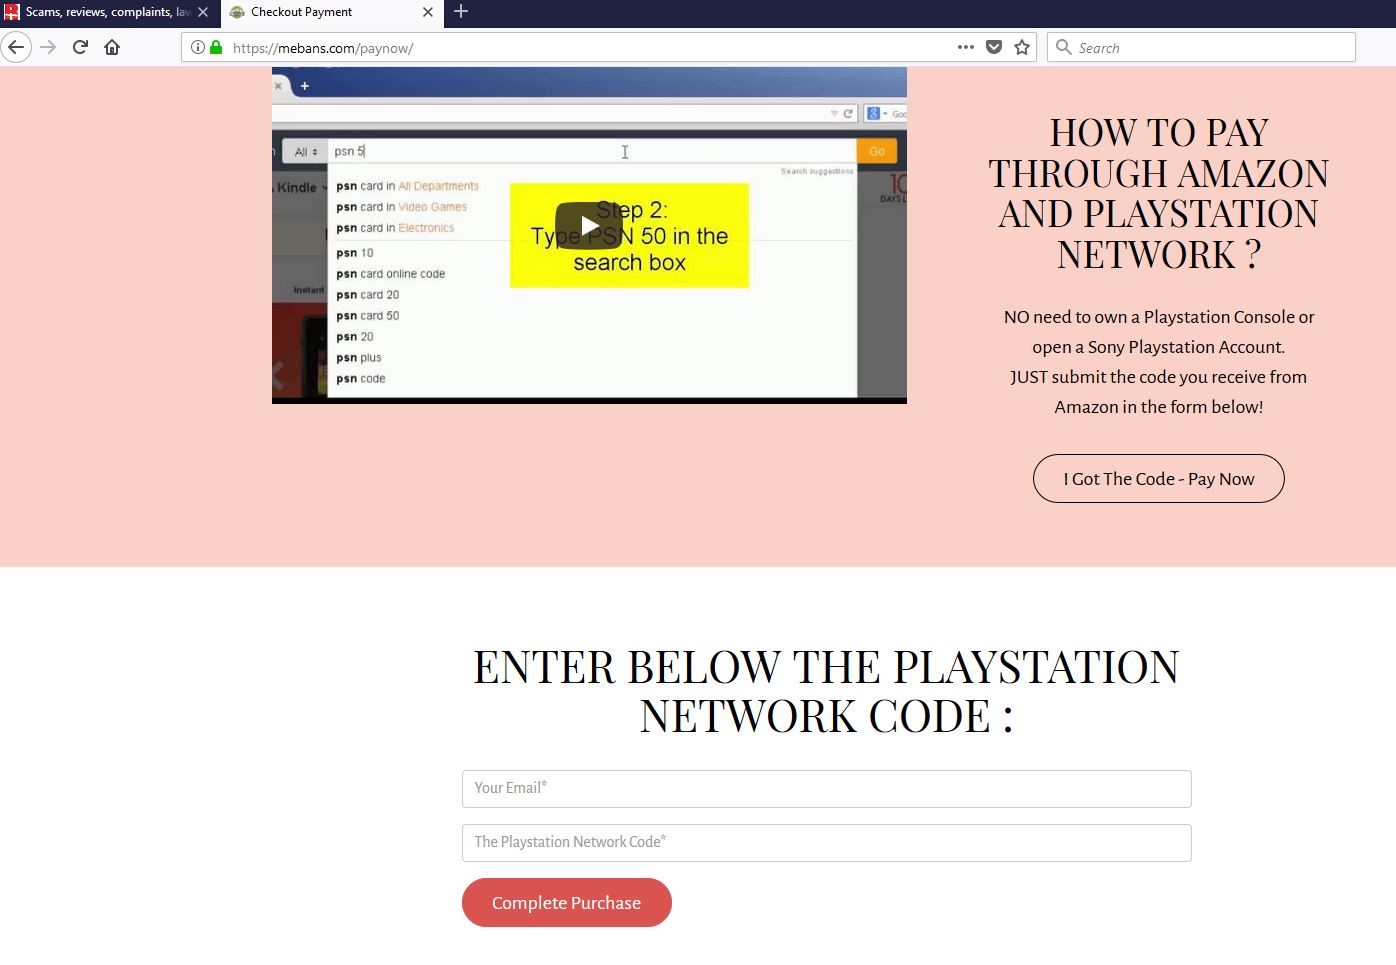 trying to scam you to provide PS Network code